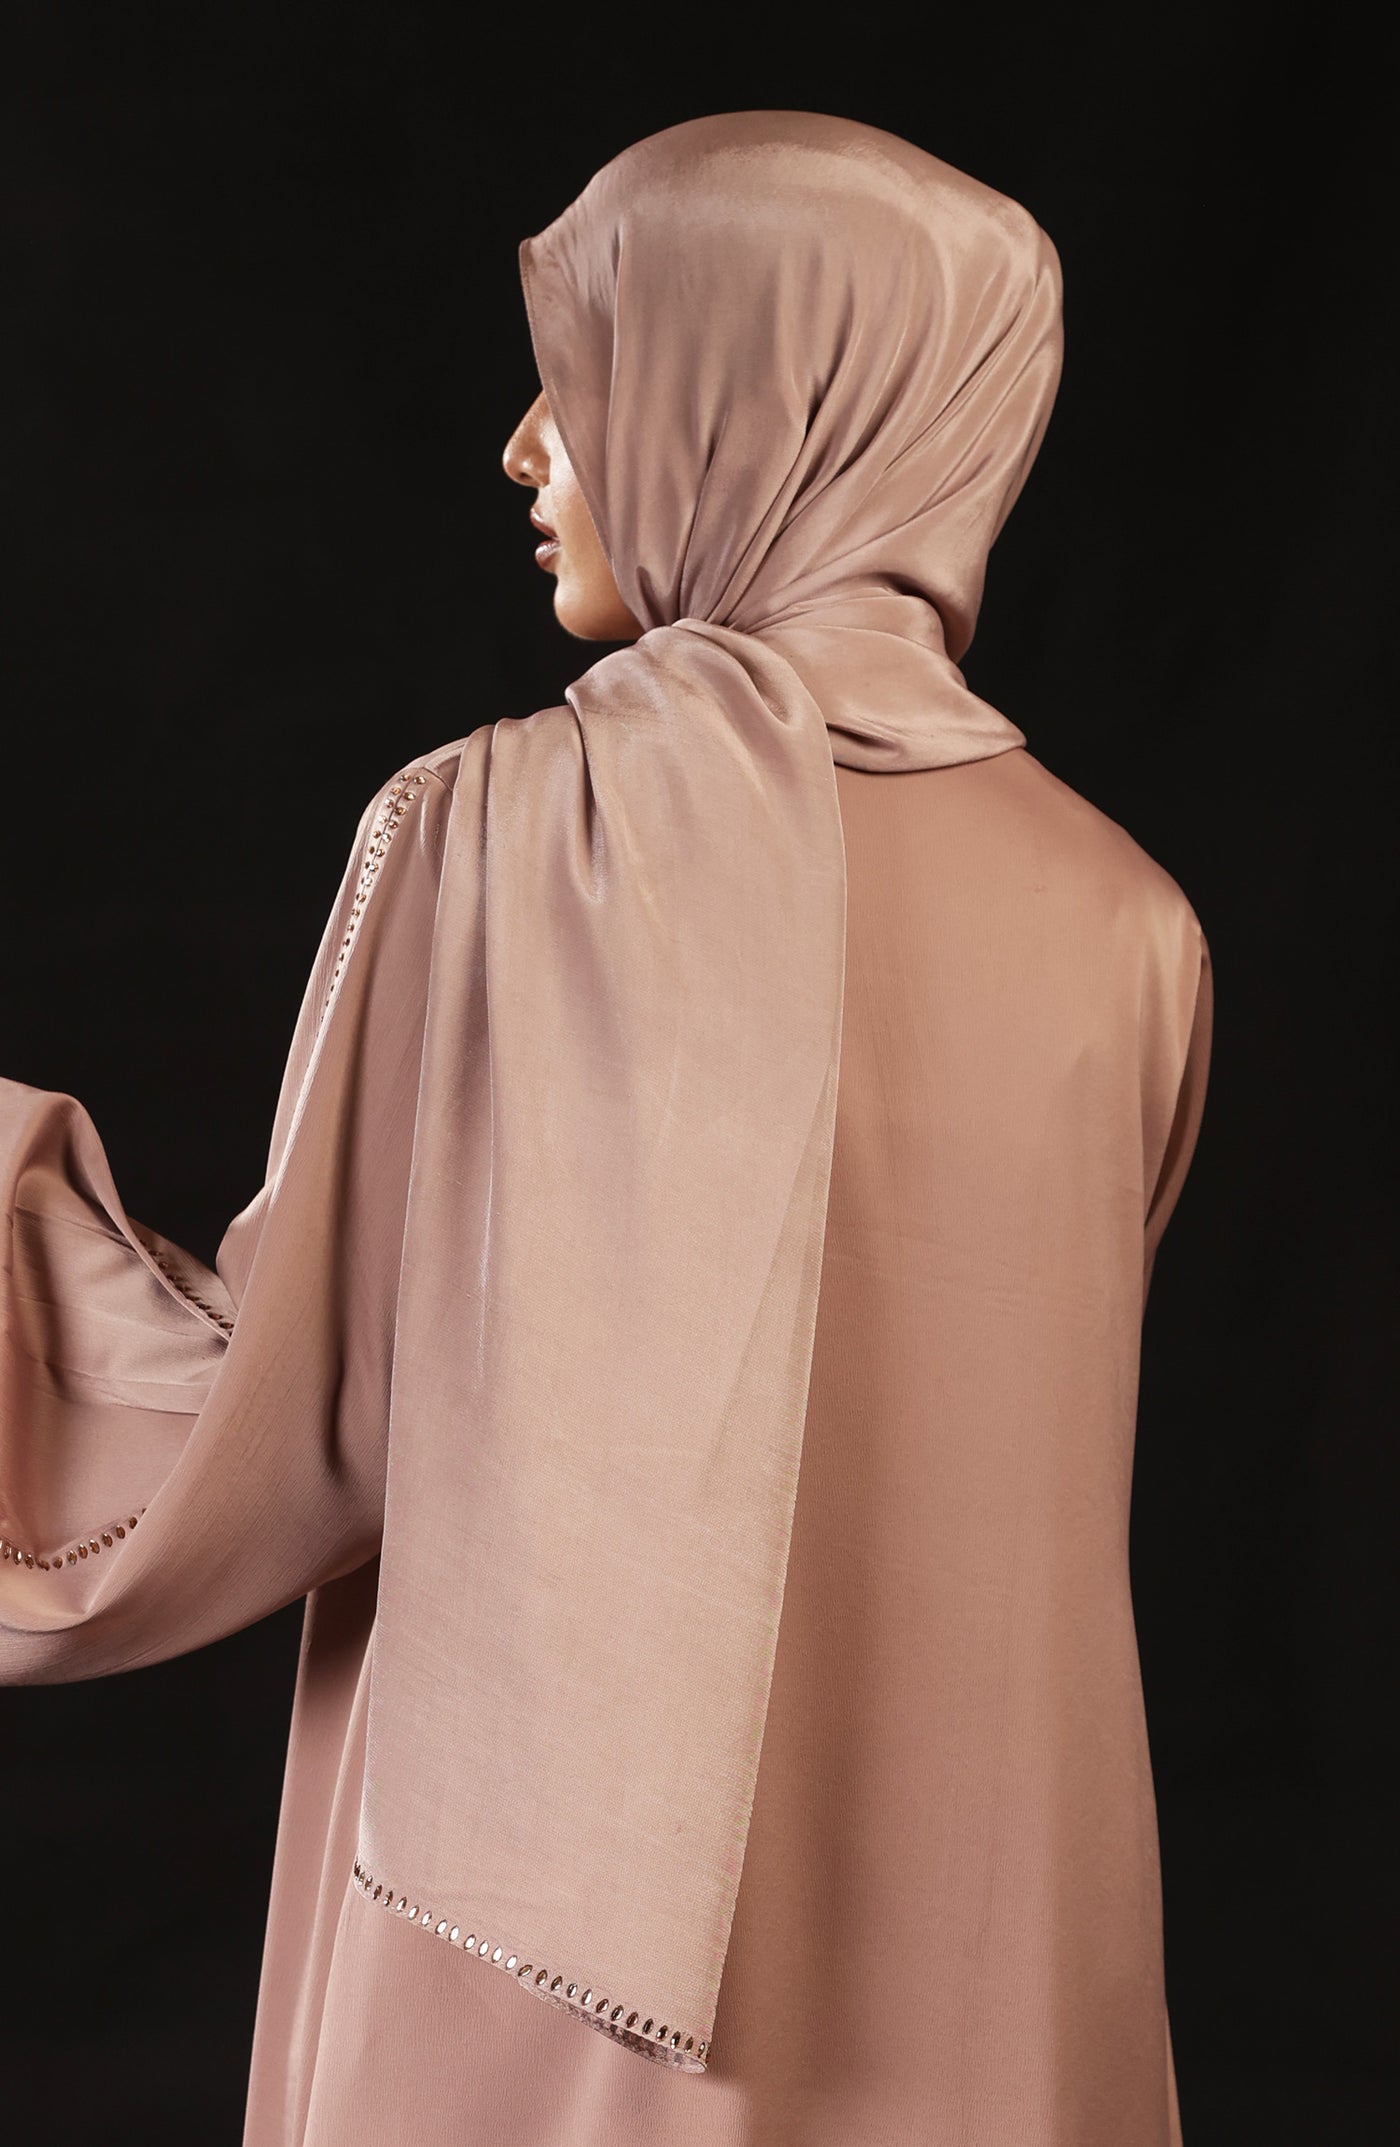 ornate silk hijab for women in beige color